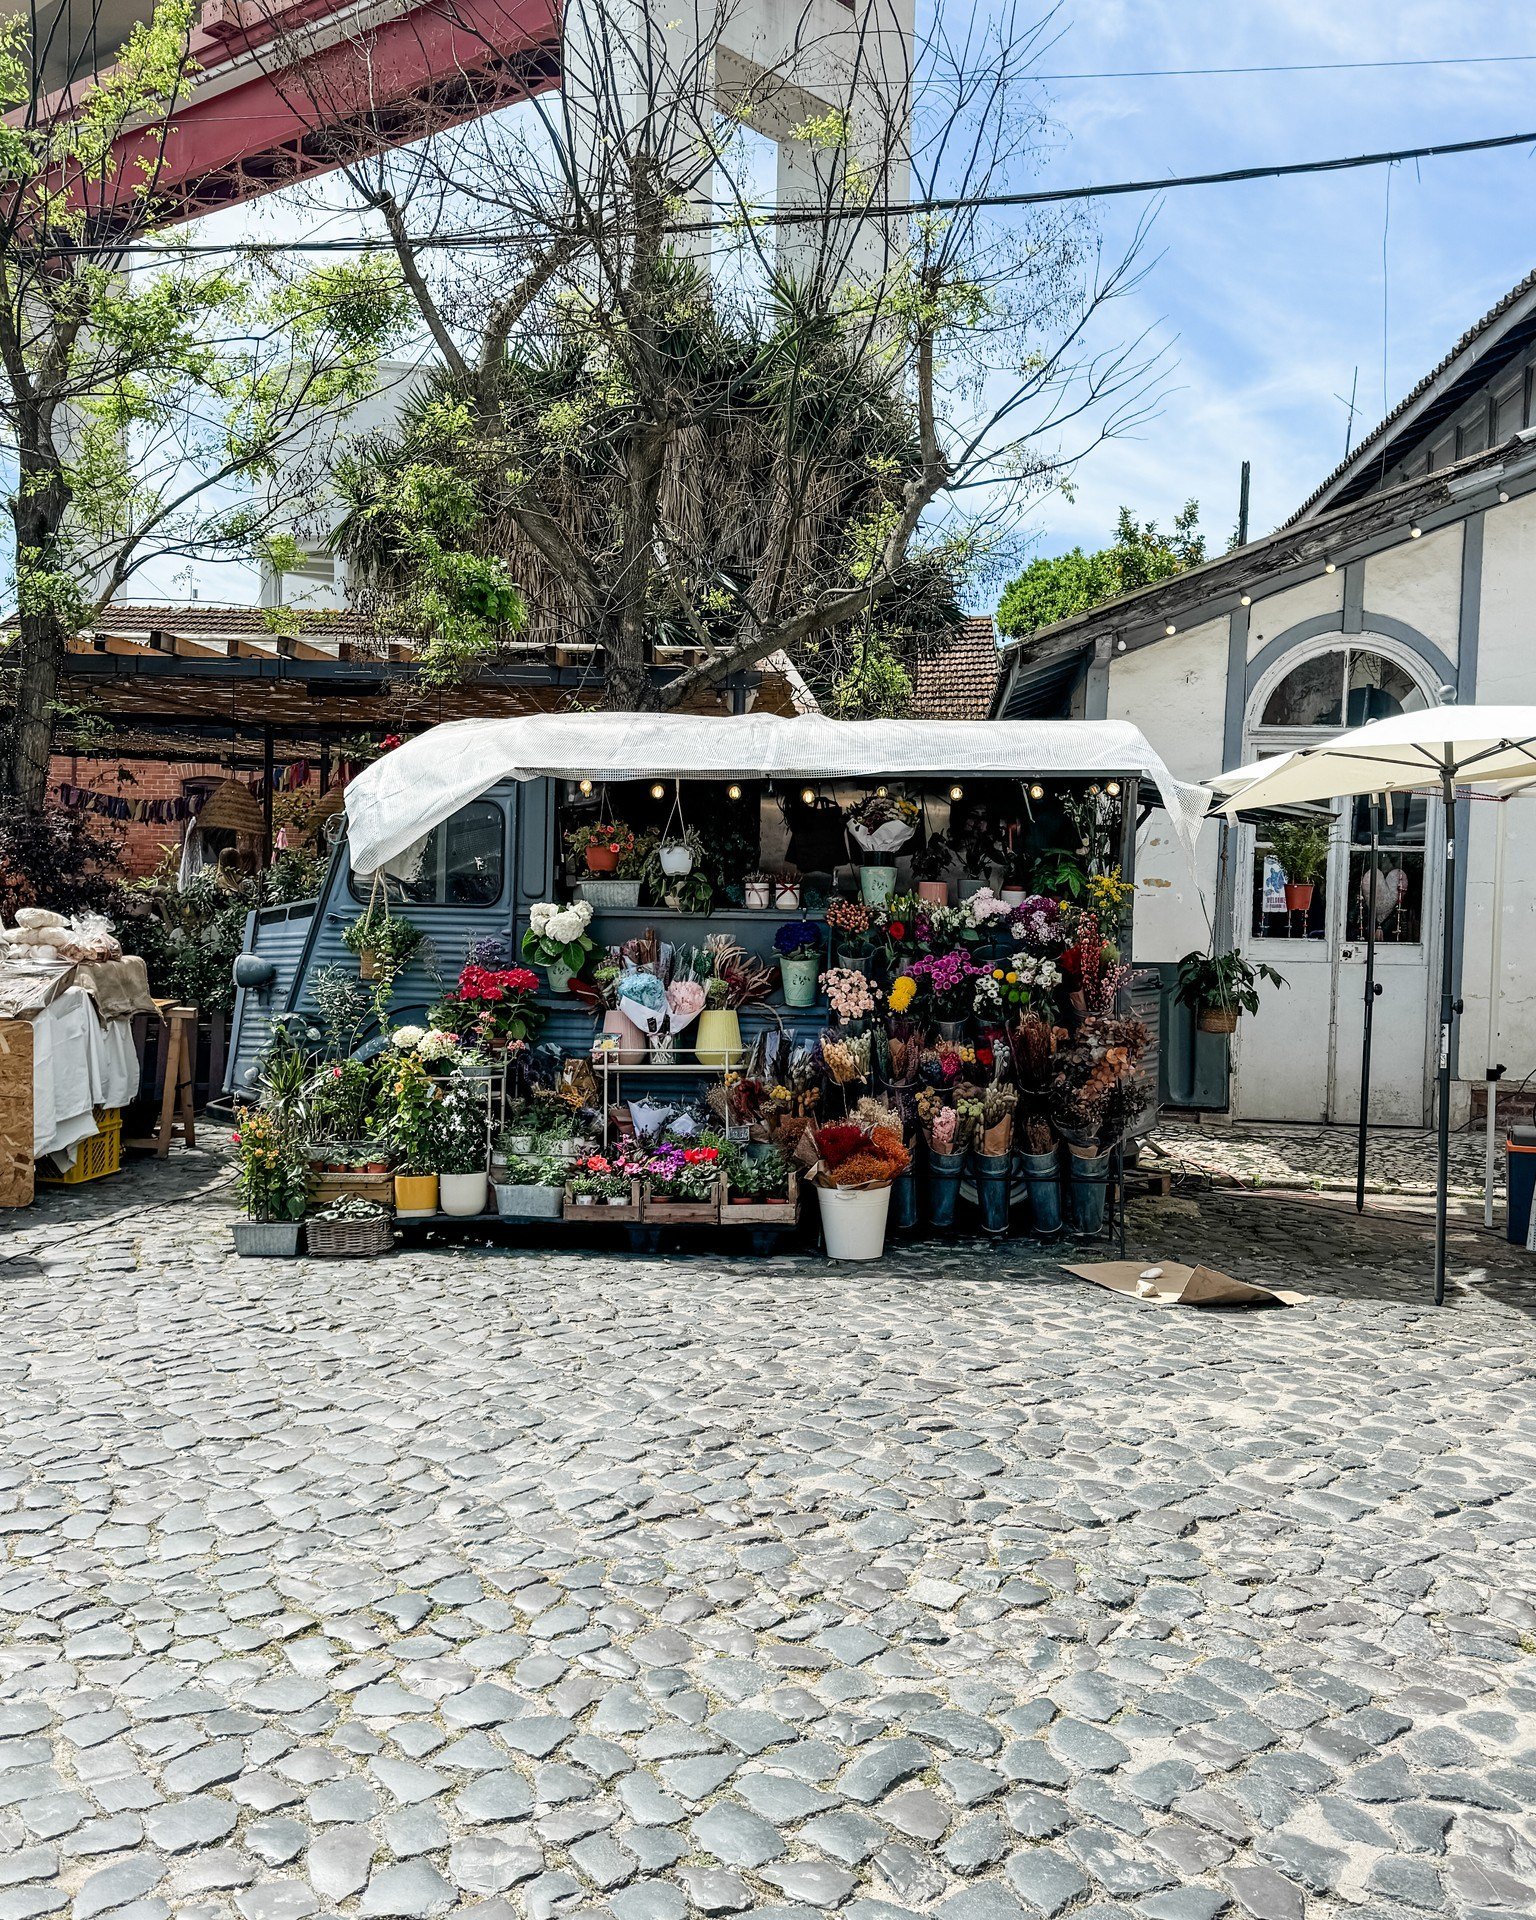 ➡️ SAVE this for your Lisbon itinerary - LX Factory ⬅️

A fun arts centre with shops, restaurants, cafes, markets and more right under the 25th April bridge.

🪴 There are cute little ceramic stores, tacos, chocolate cake, a&ccedil;ai, a famous books